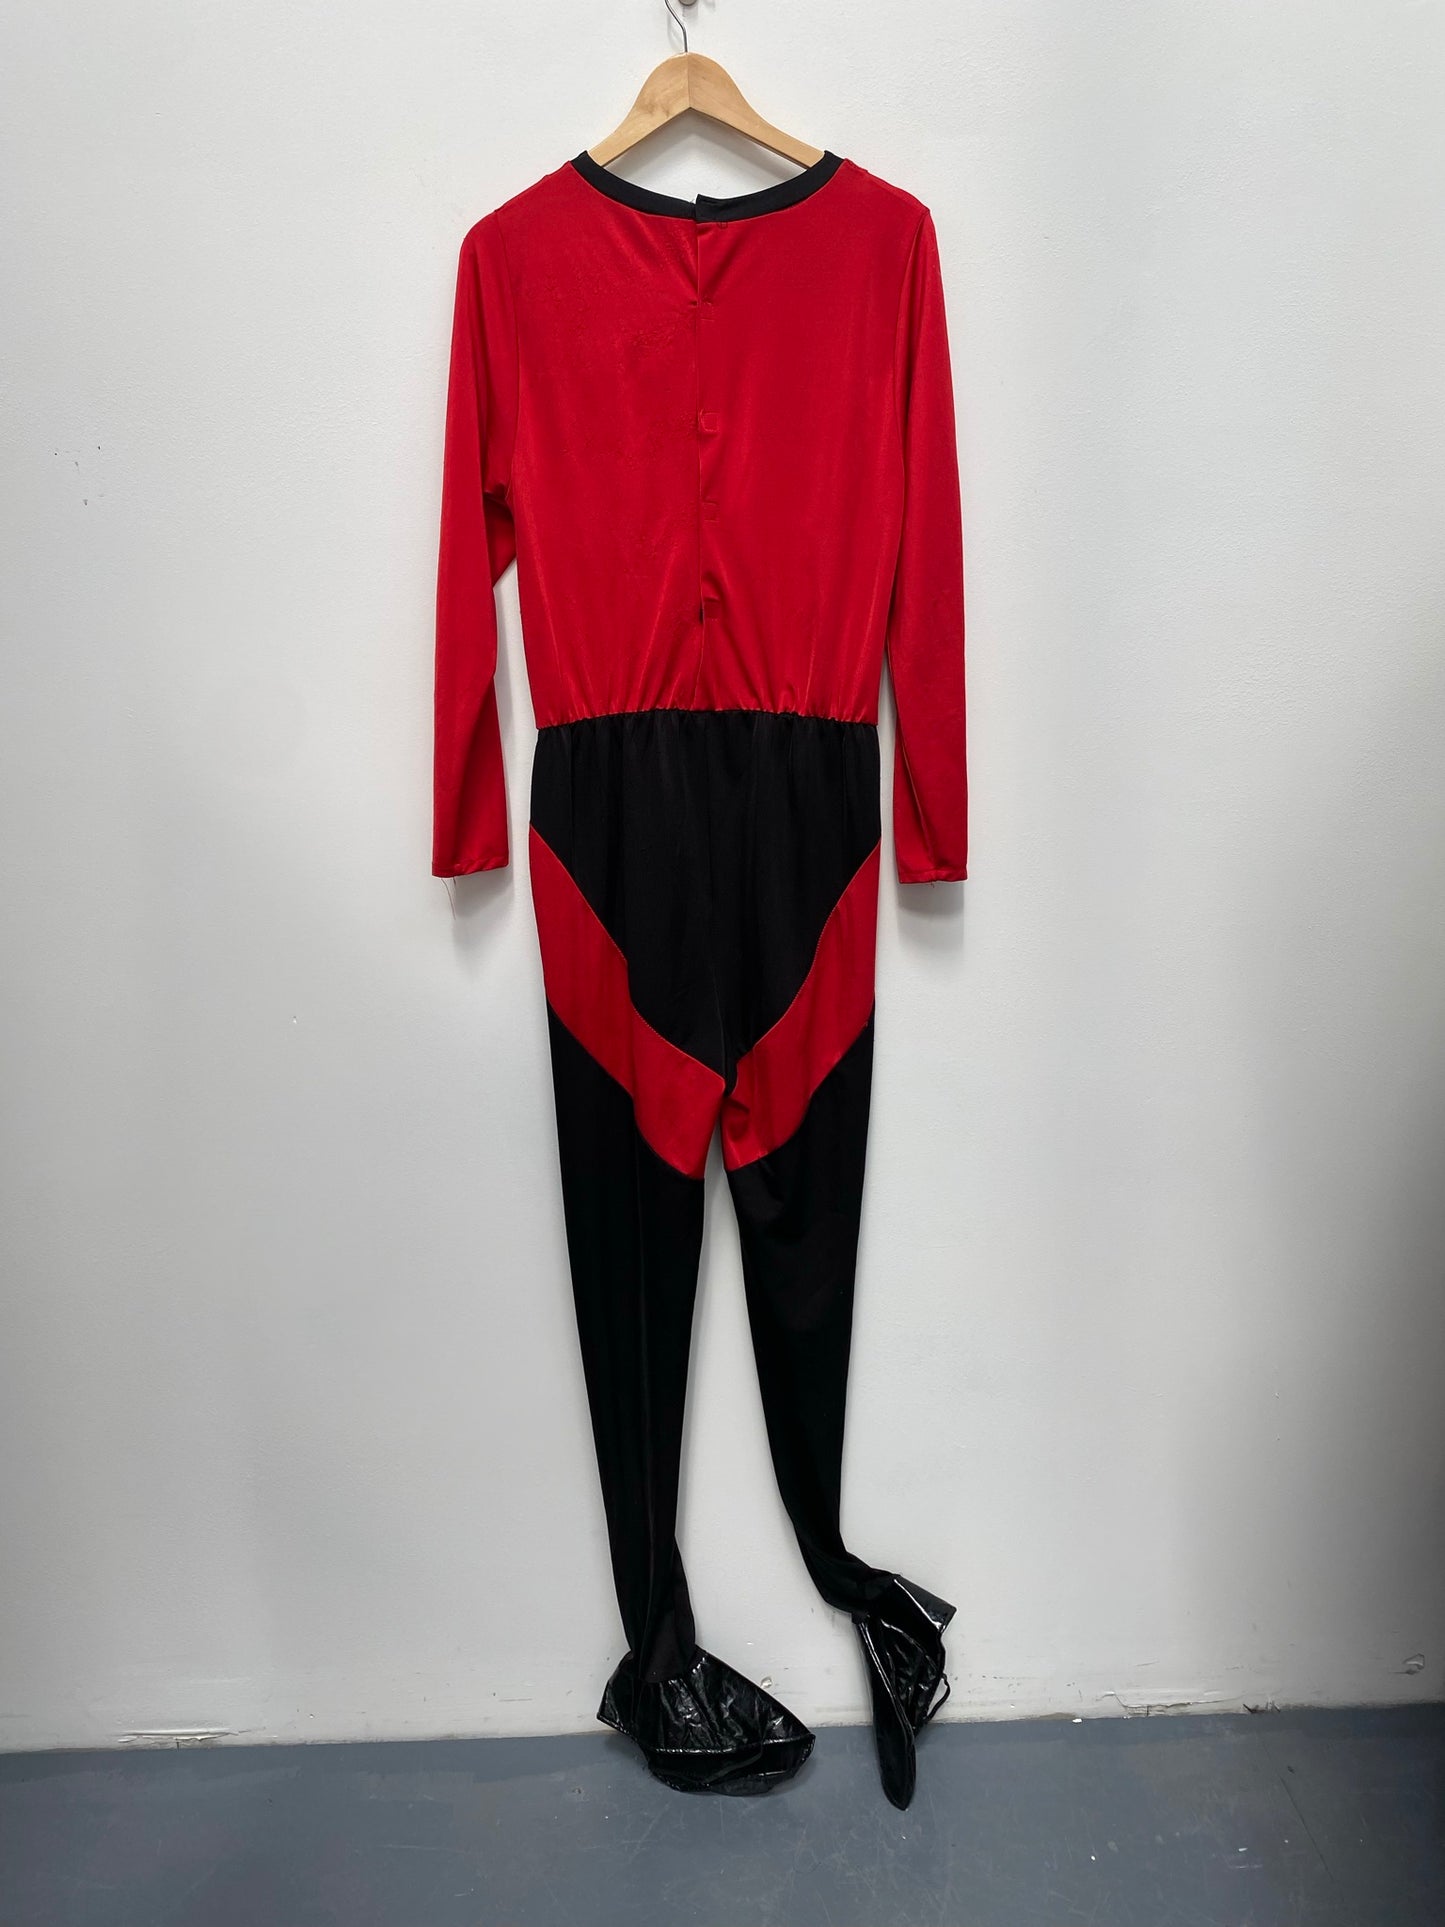 The Incredibles Bodysuit Size Large - Ex Hire Fancy Dress Costume